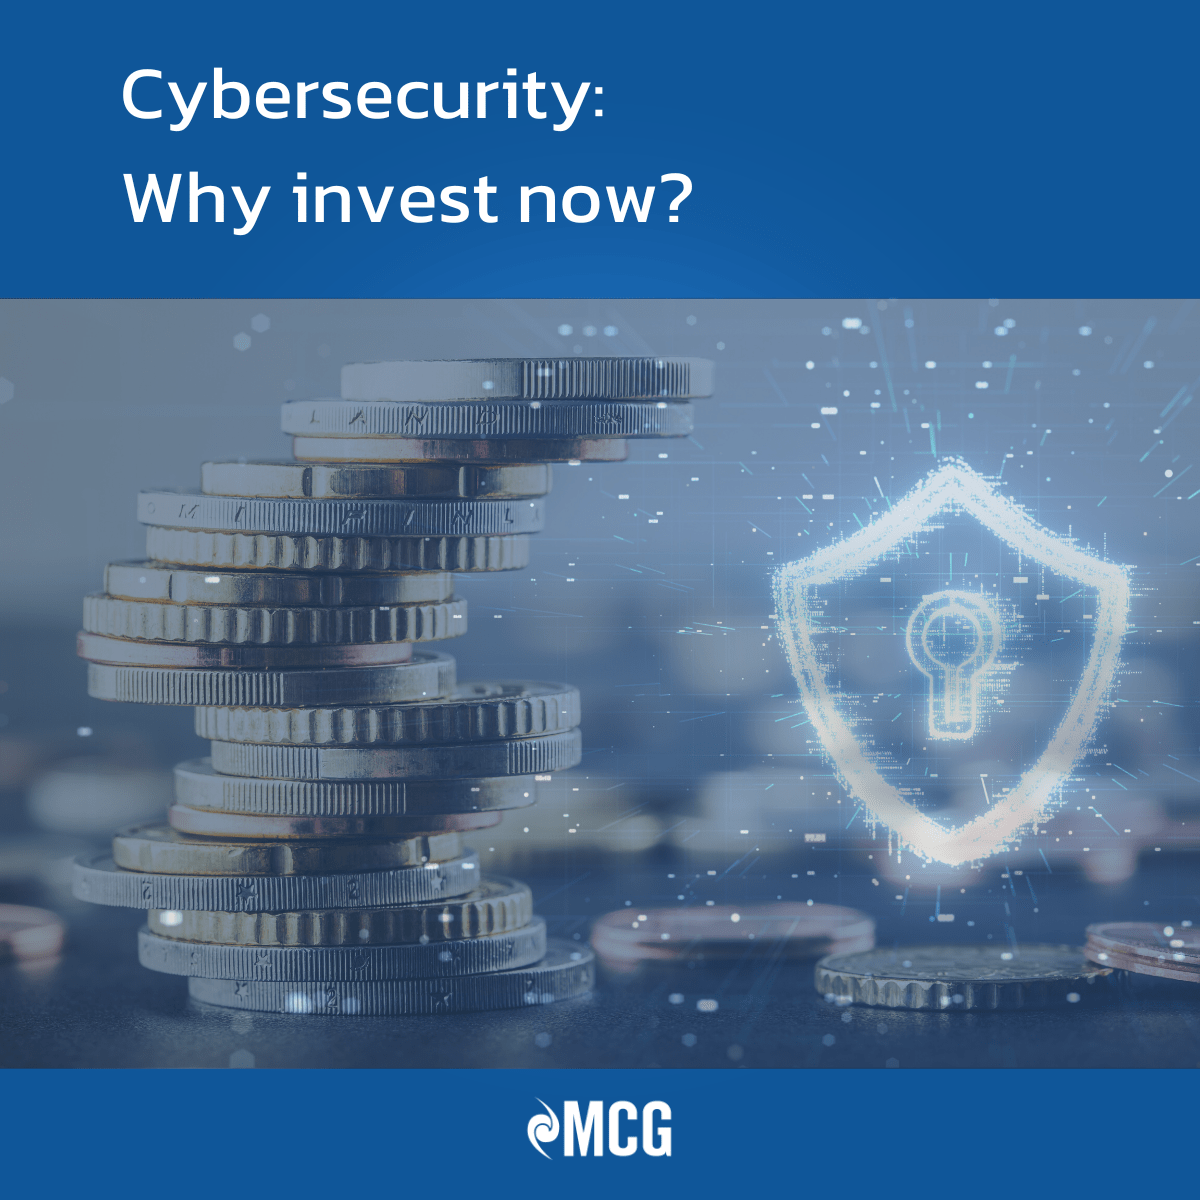 Cybersecurity: Why invest now?